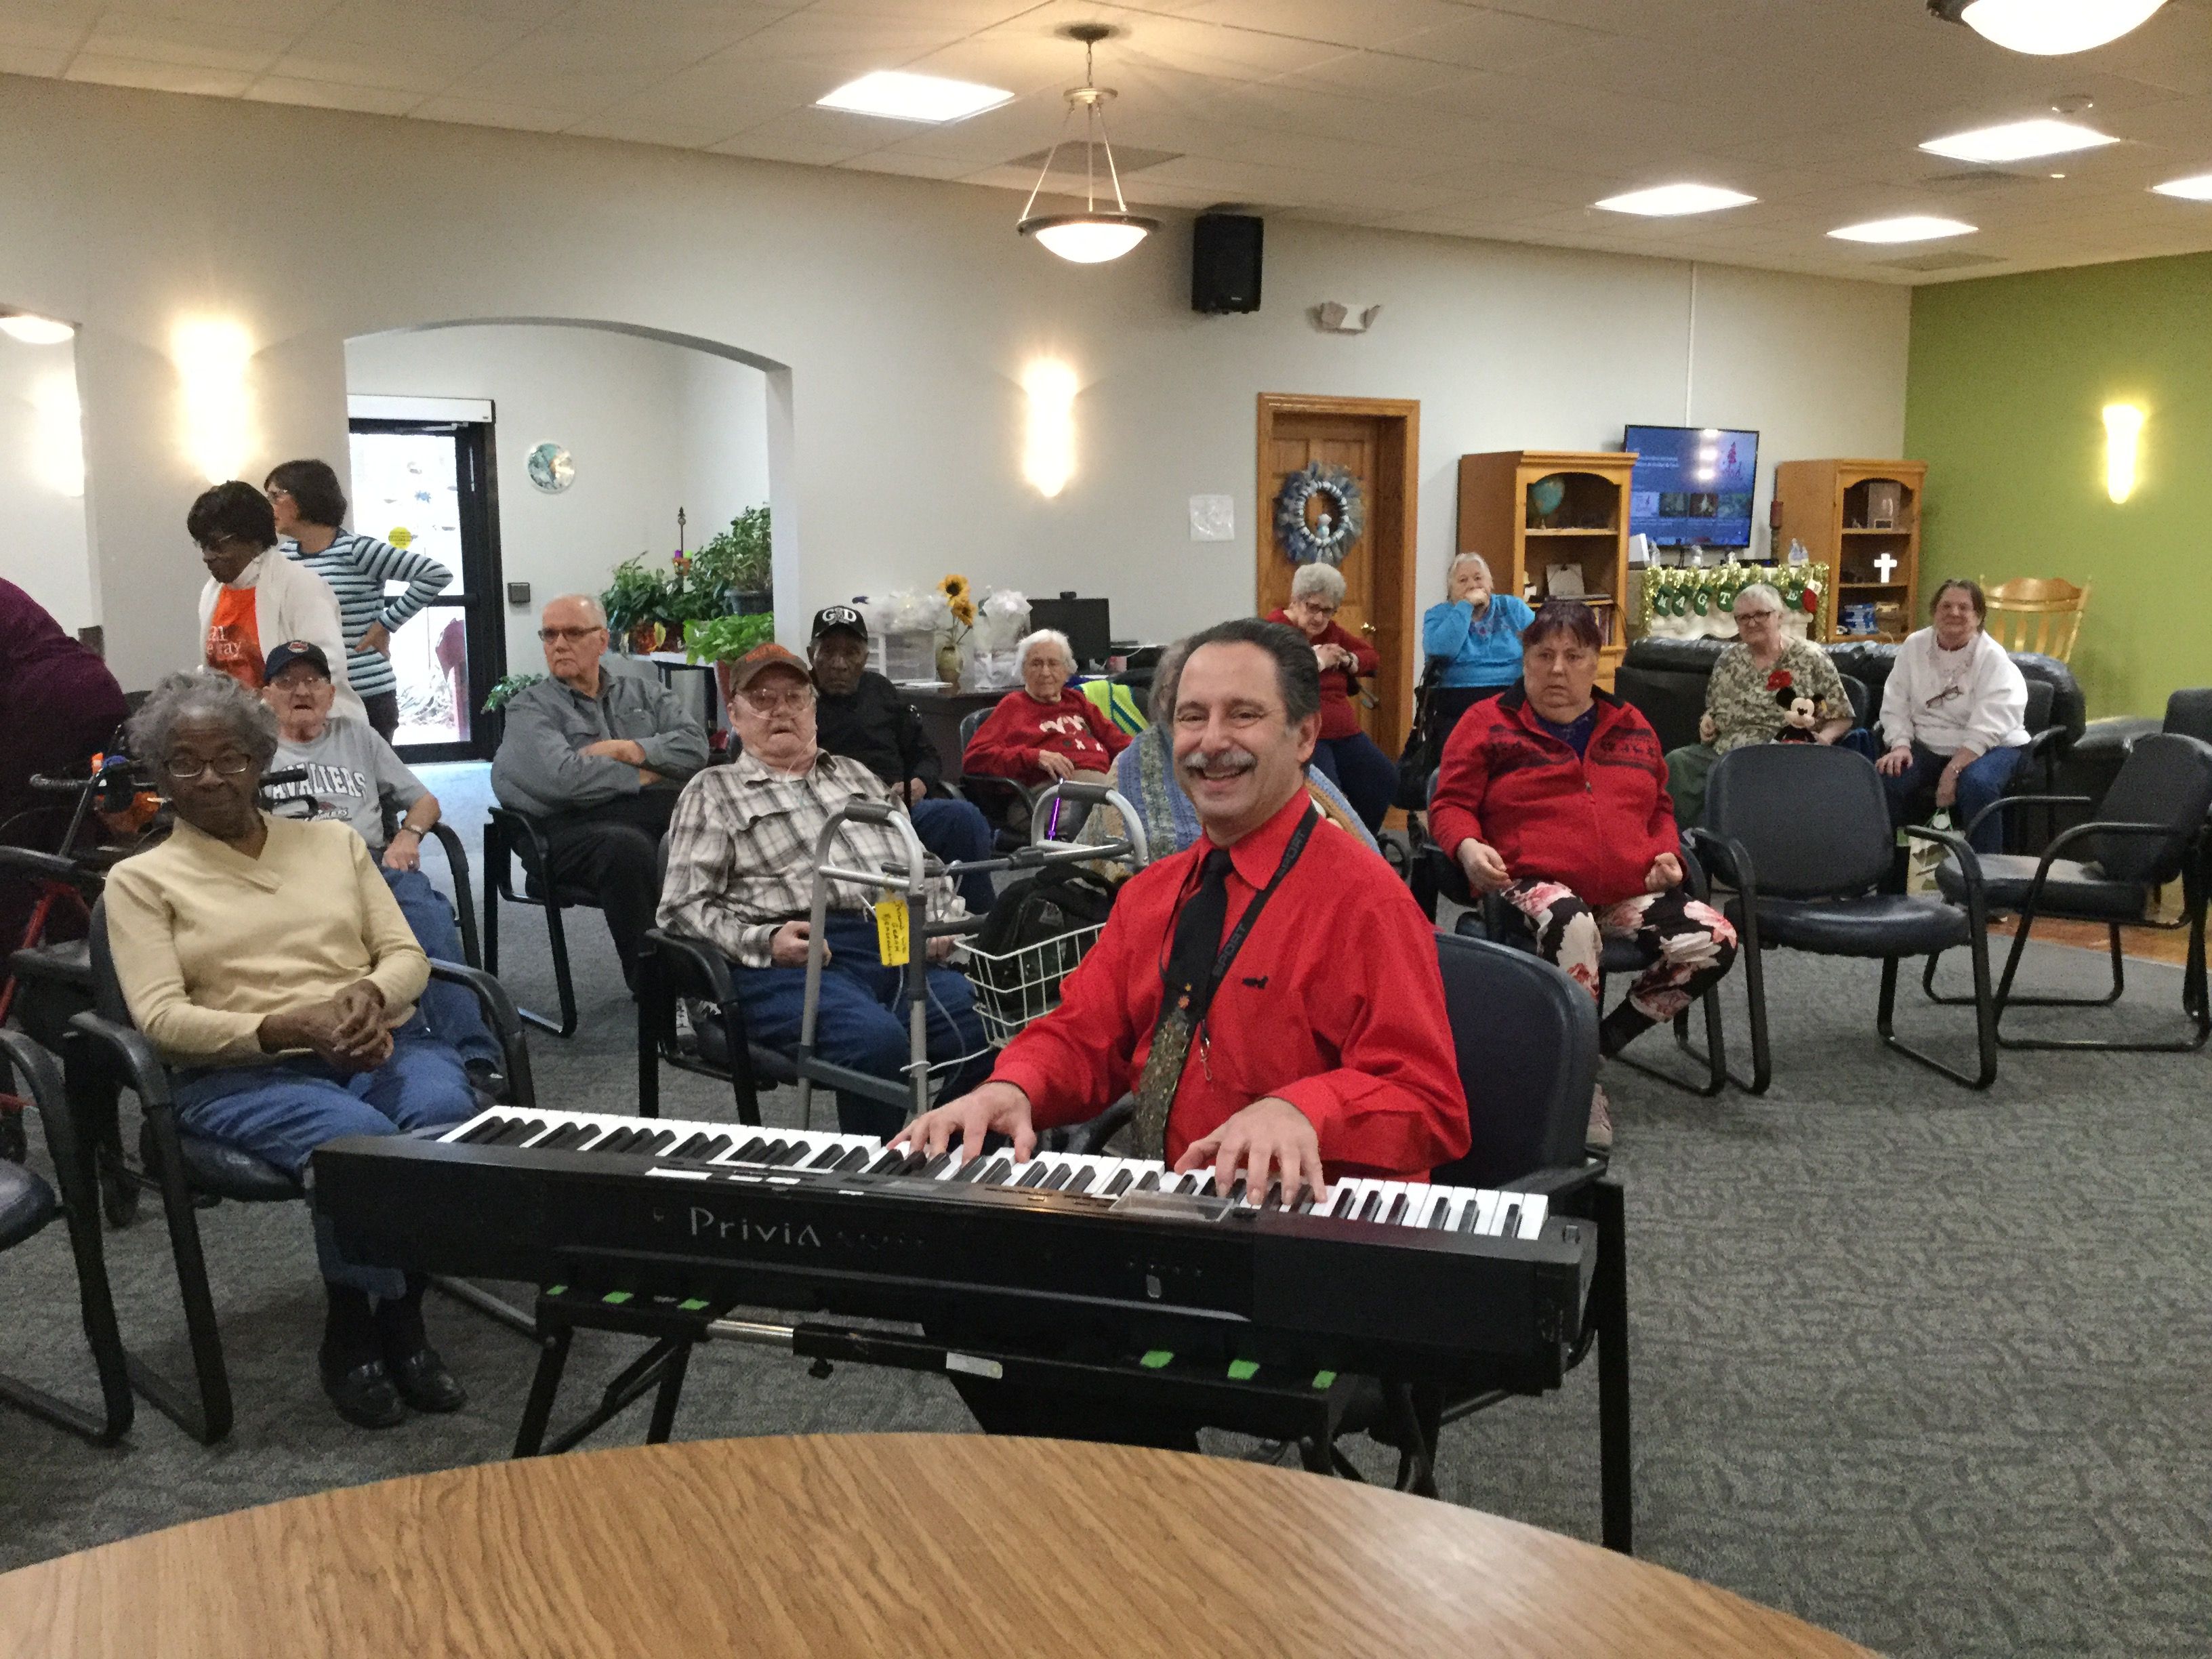 Steve Dallas entertains at our Adult Day Center with a sing-a-long